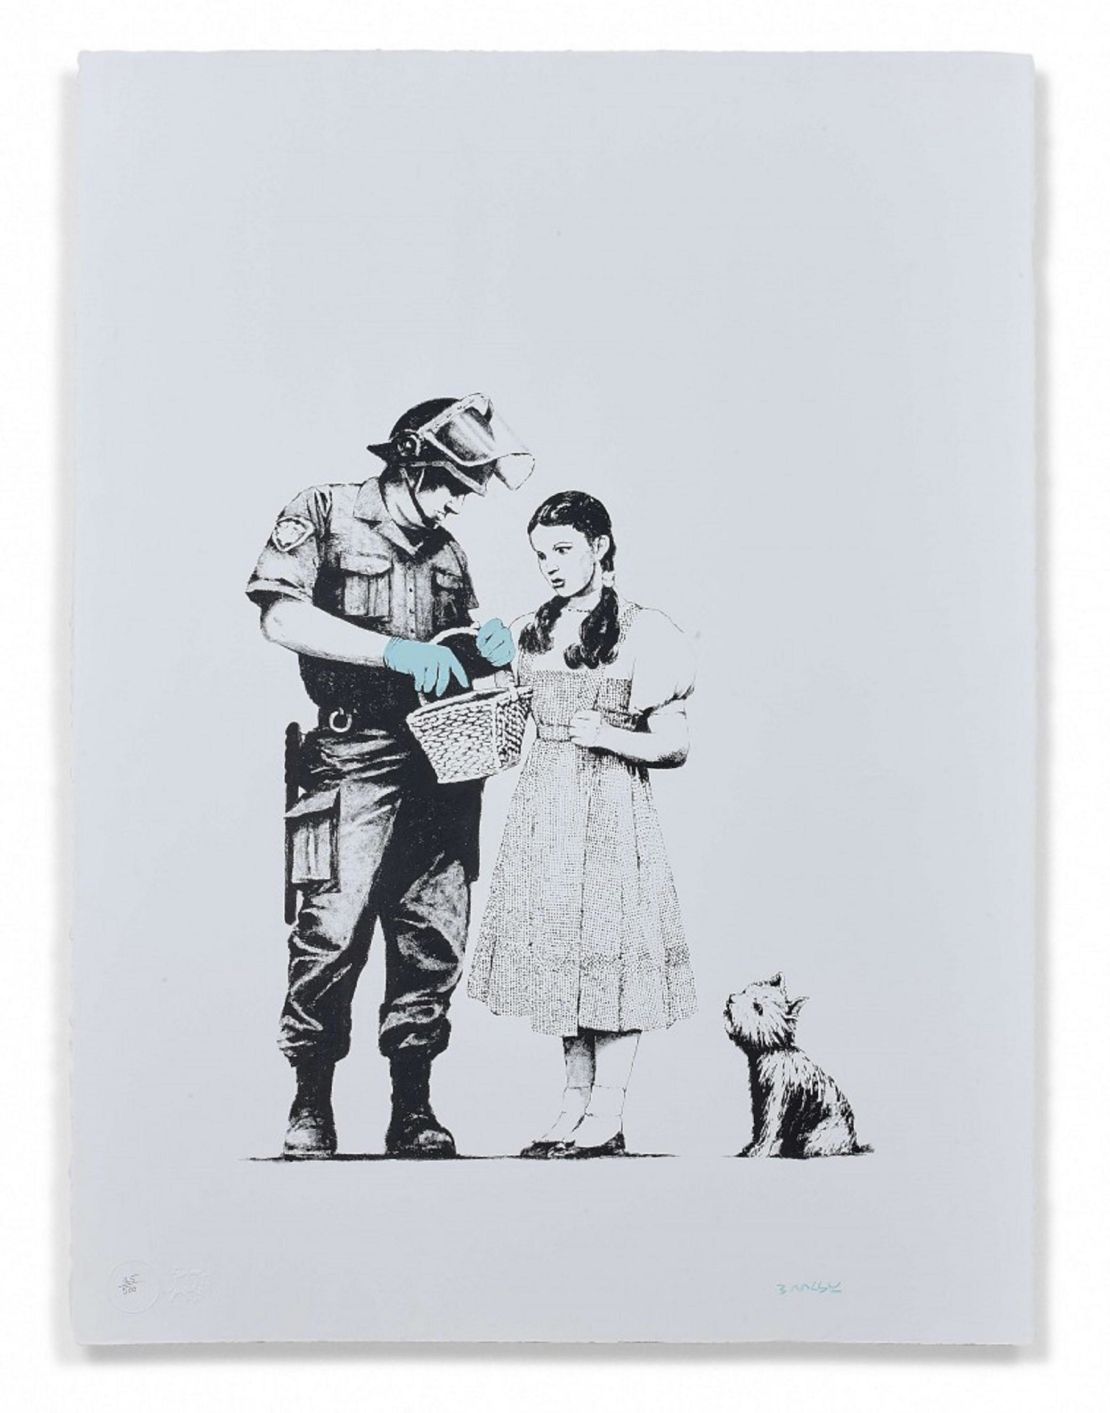 Three Banksy prints are part Artcurial's collection, with bidding starting between €30,000 ($34,400) on the artist's print depicting Dorothy from "The Wizard of Oz" being searched by a police officer, titled "Stop and Search."